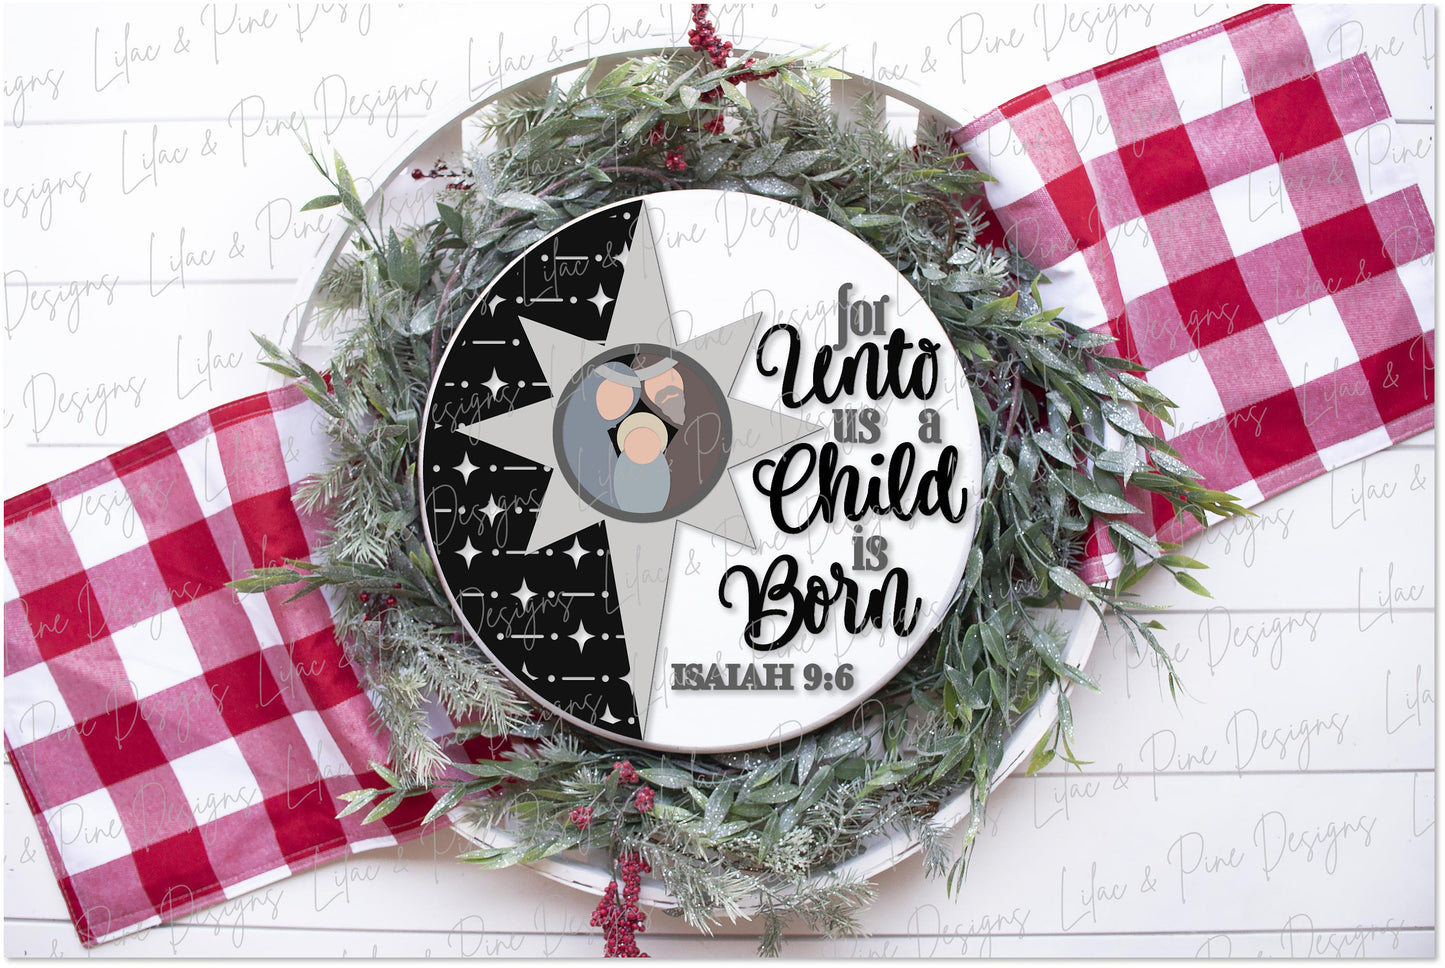 Unto us a Child is Born SVG, Christmas welcome sign SVG, Christmas door hanger SVG, Religious Christmas sign, Glowforge Svg, laser cut file